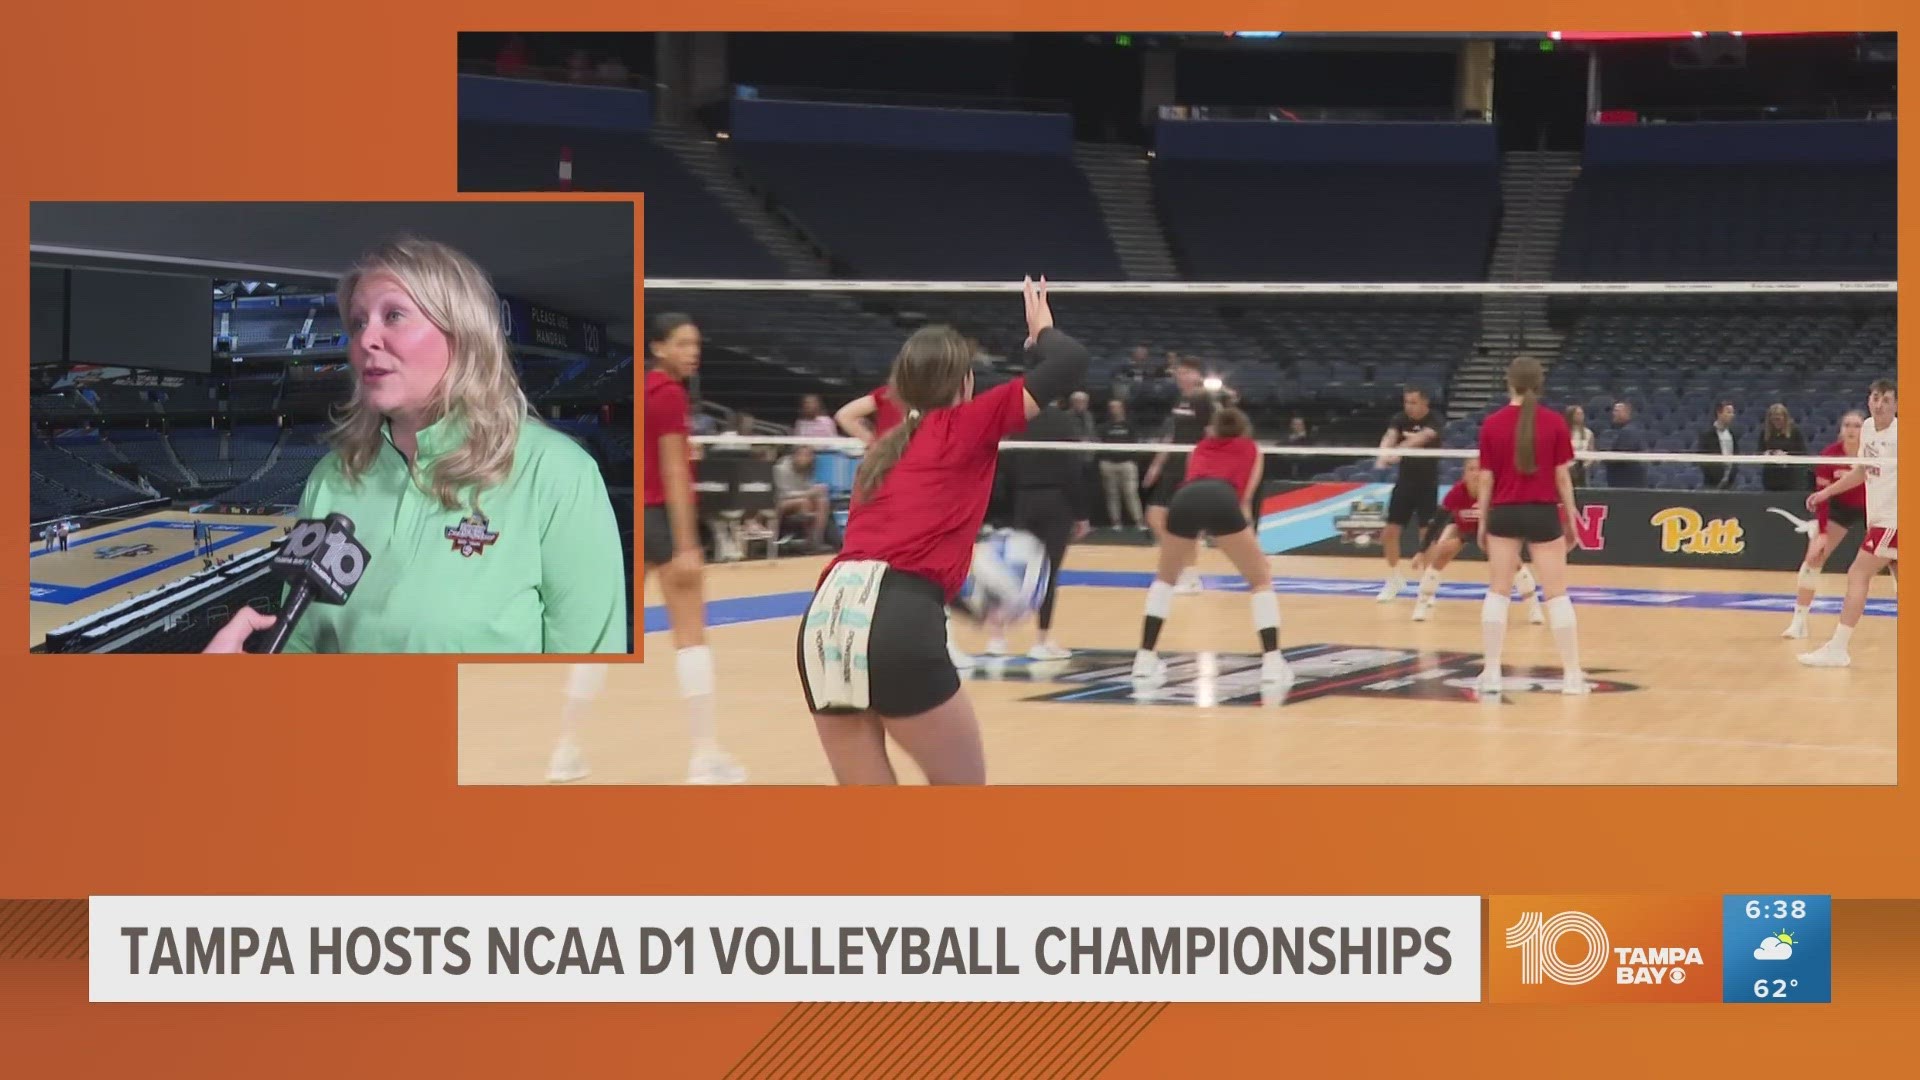 The women's college volleyball tournament faces a record-setting year. We report on the matchups being hosted at Tampa.